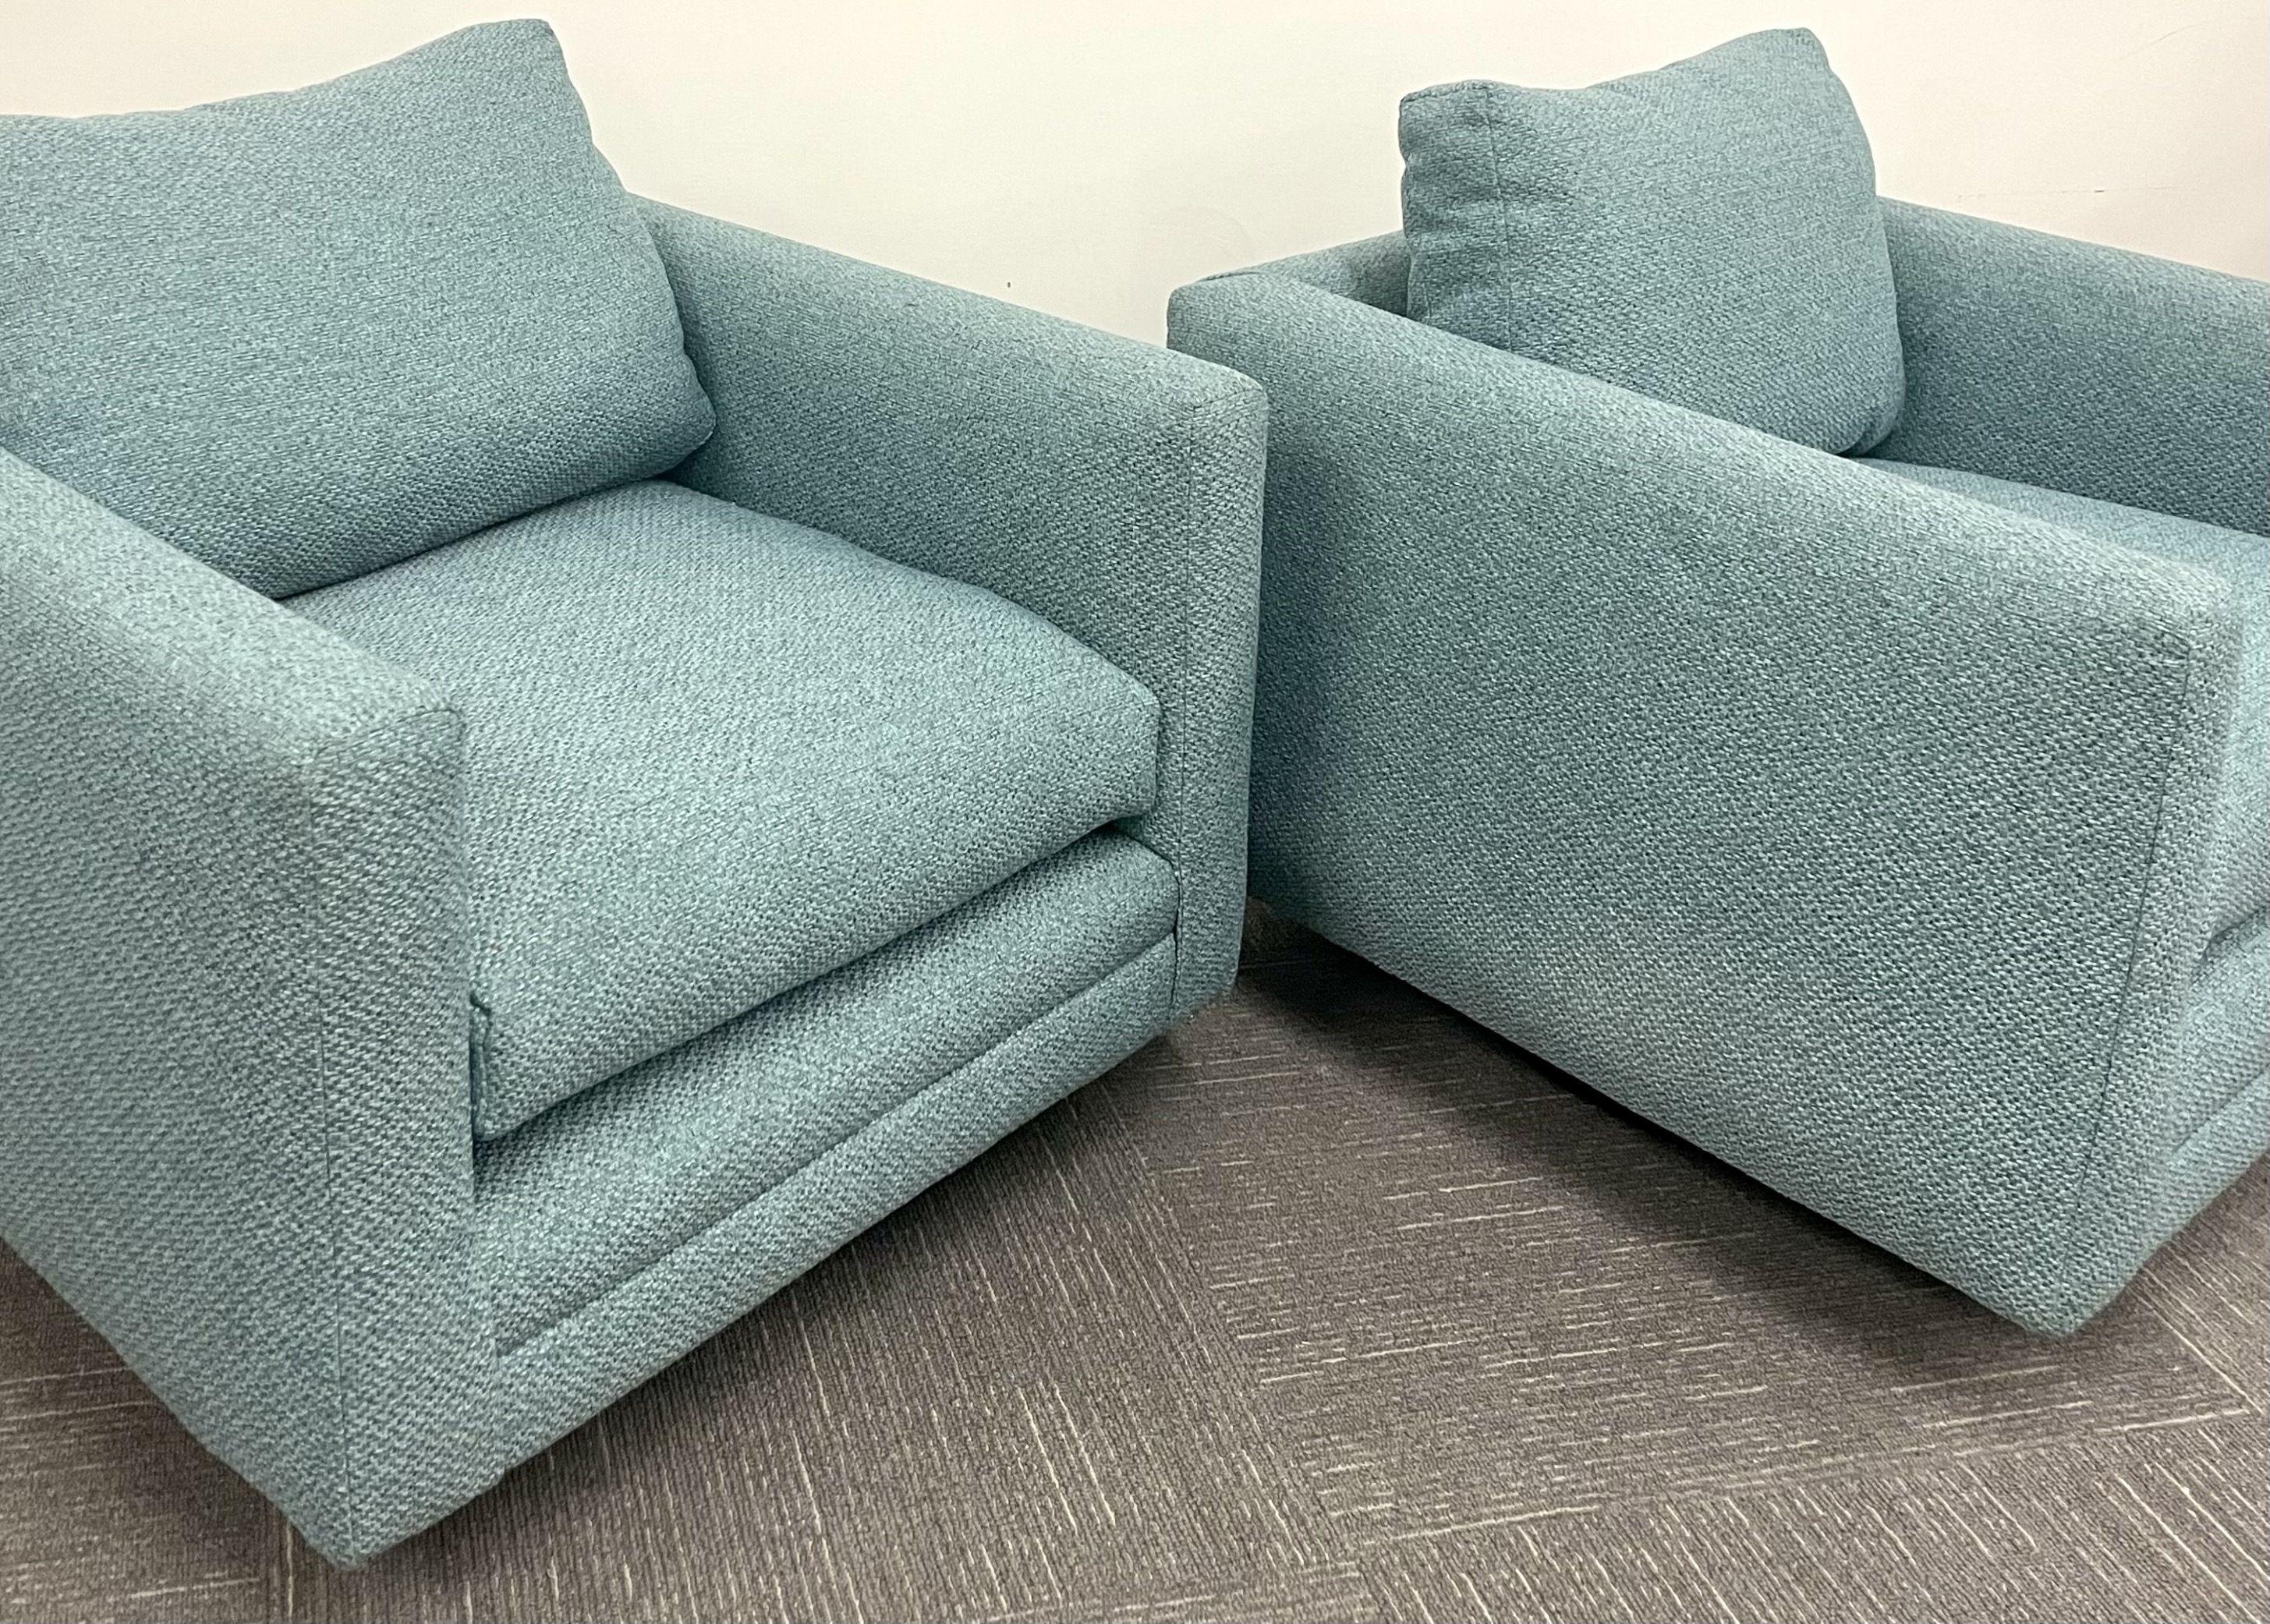 American Pair Teal Milo Baughman Style Mid-Century Modern Lounge Chairs, Swivel, Square For Sale